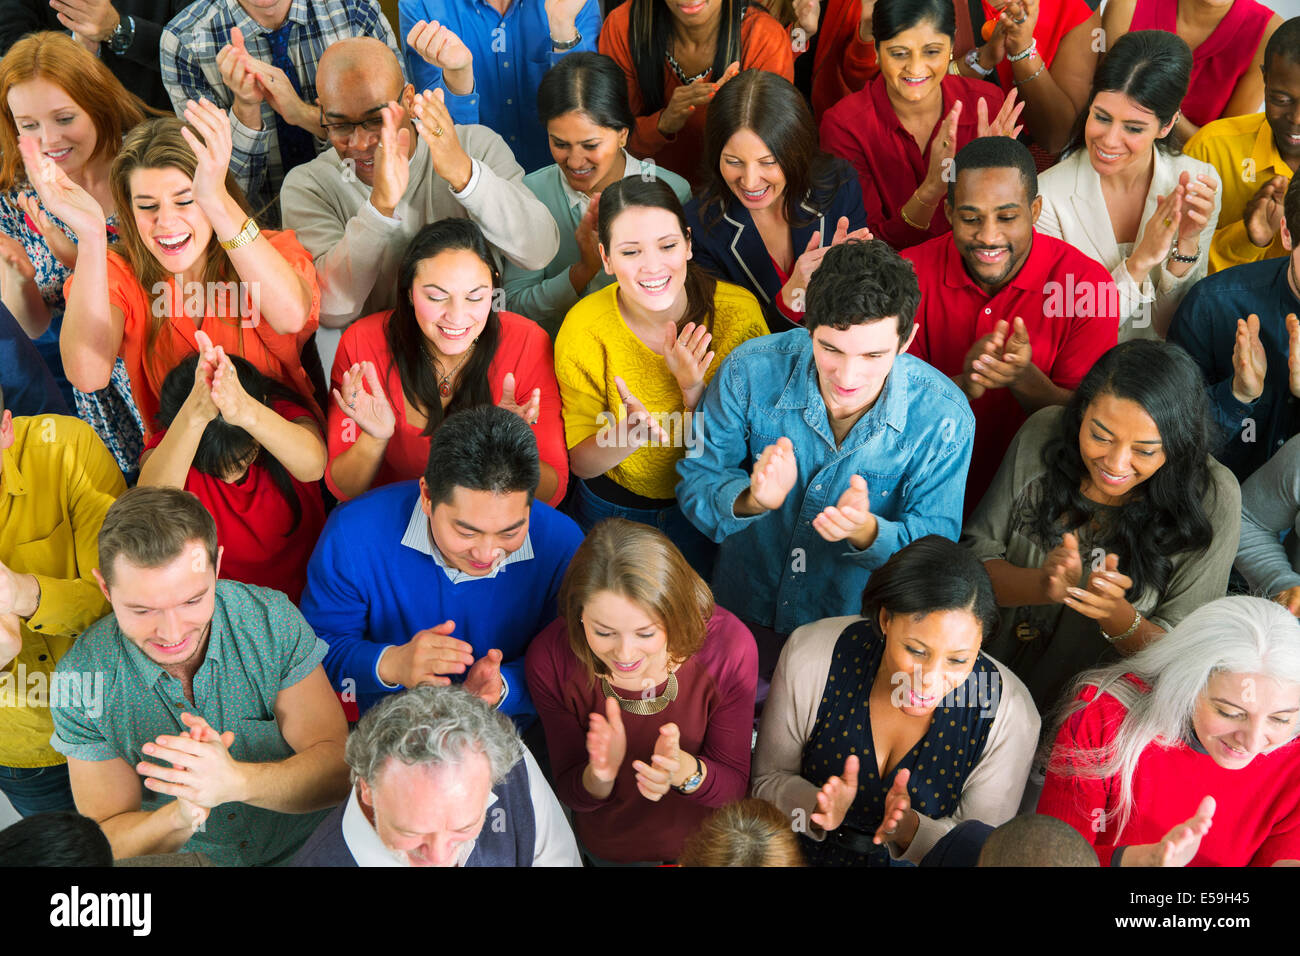 Diverse crowd clapping Stock Photo